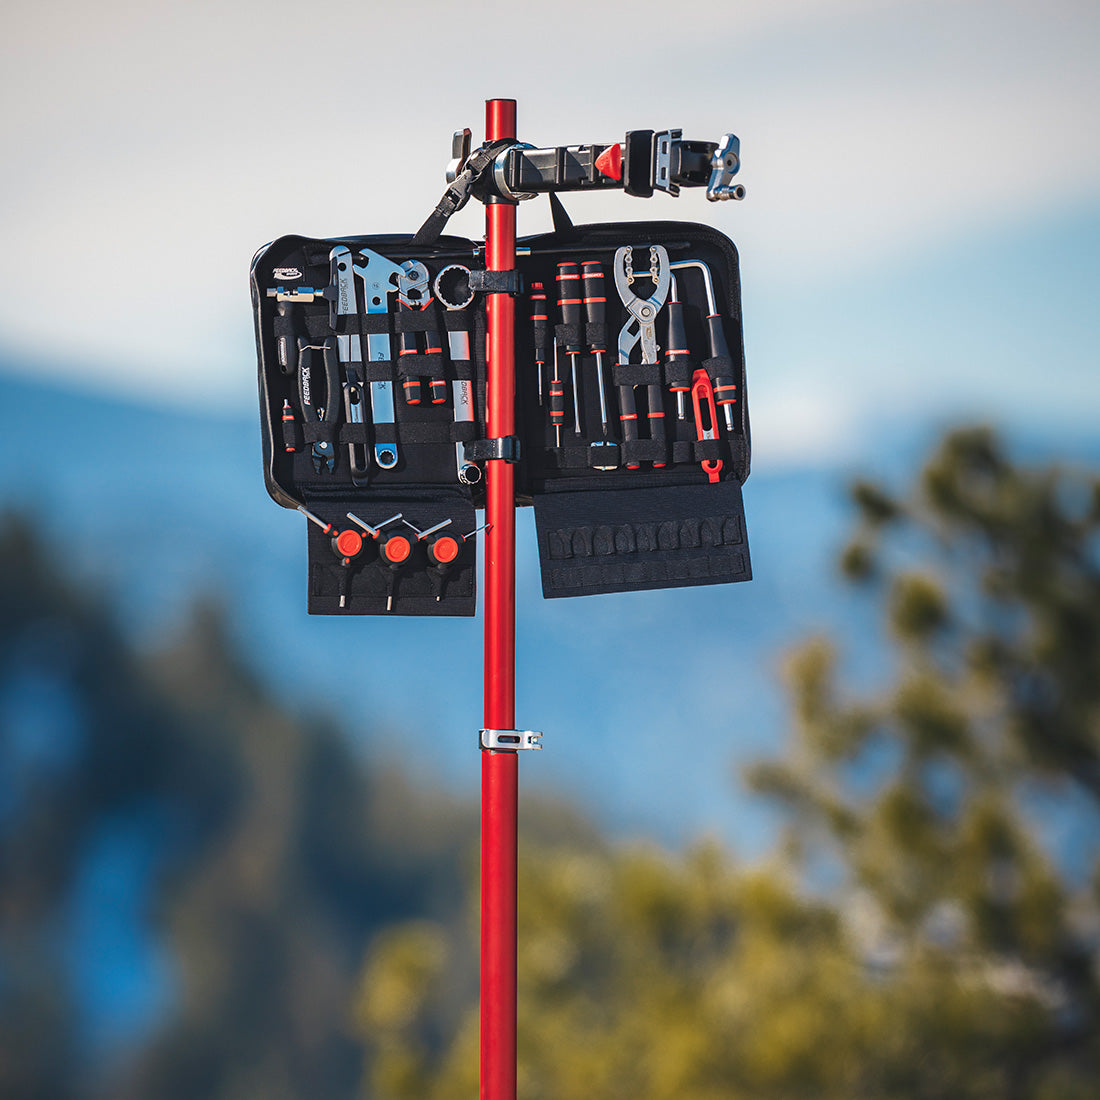 feedback sports team edition toolkit hanging on a pro mechanic bike repair stand at a trailhead